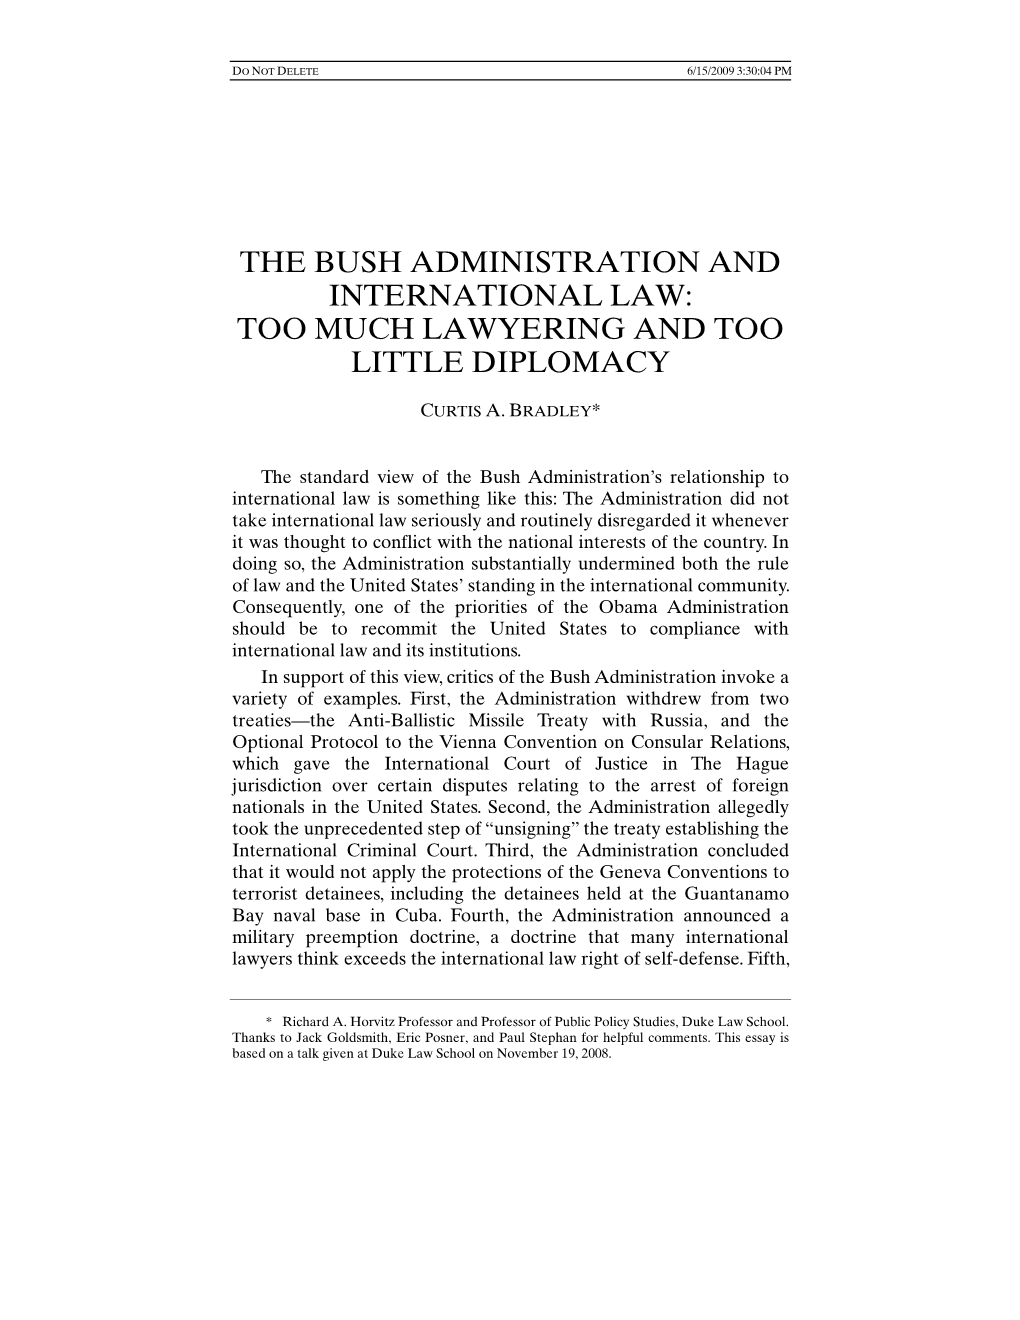 The Bush Administration and International Law: Too Much Lawyering and Too Little Diplomacy